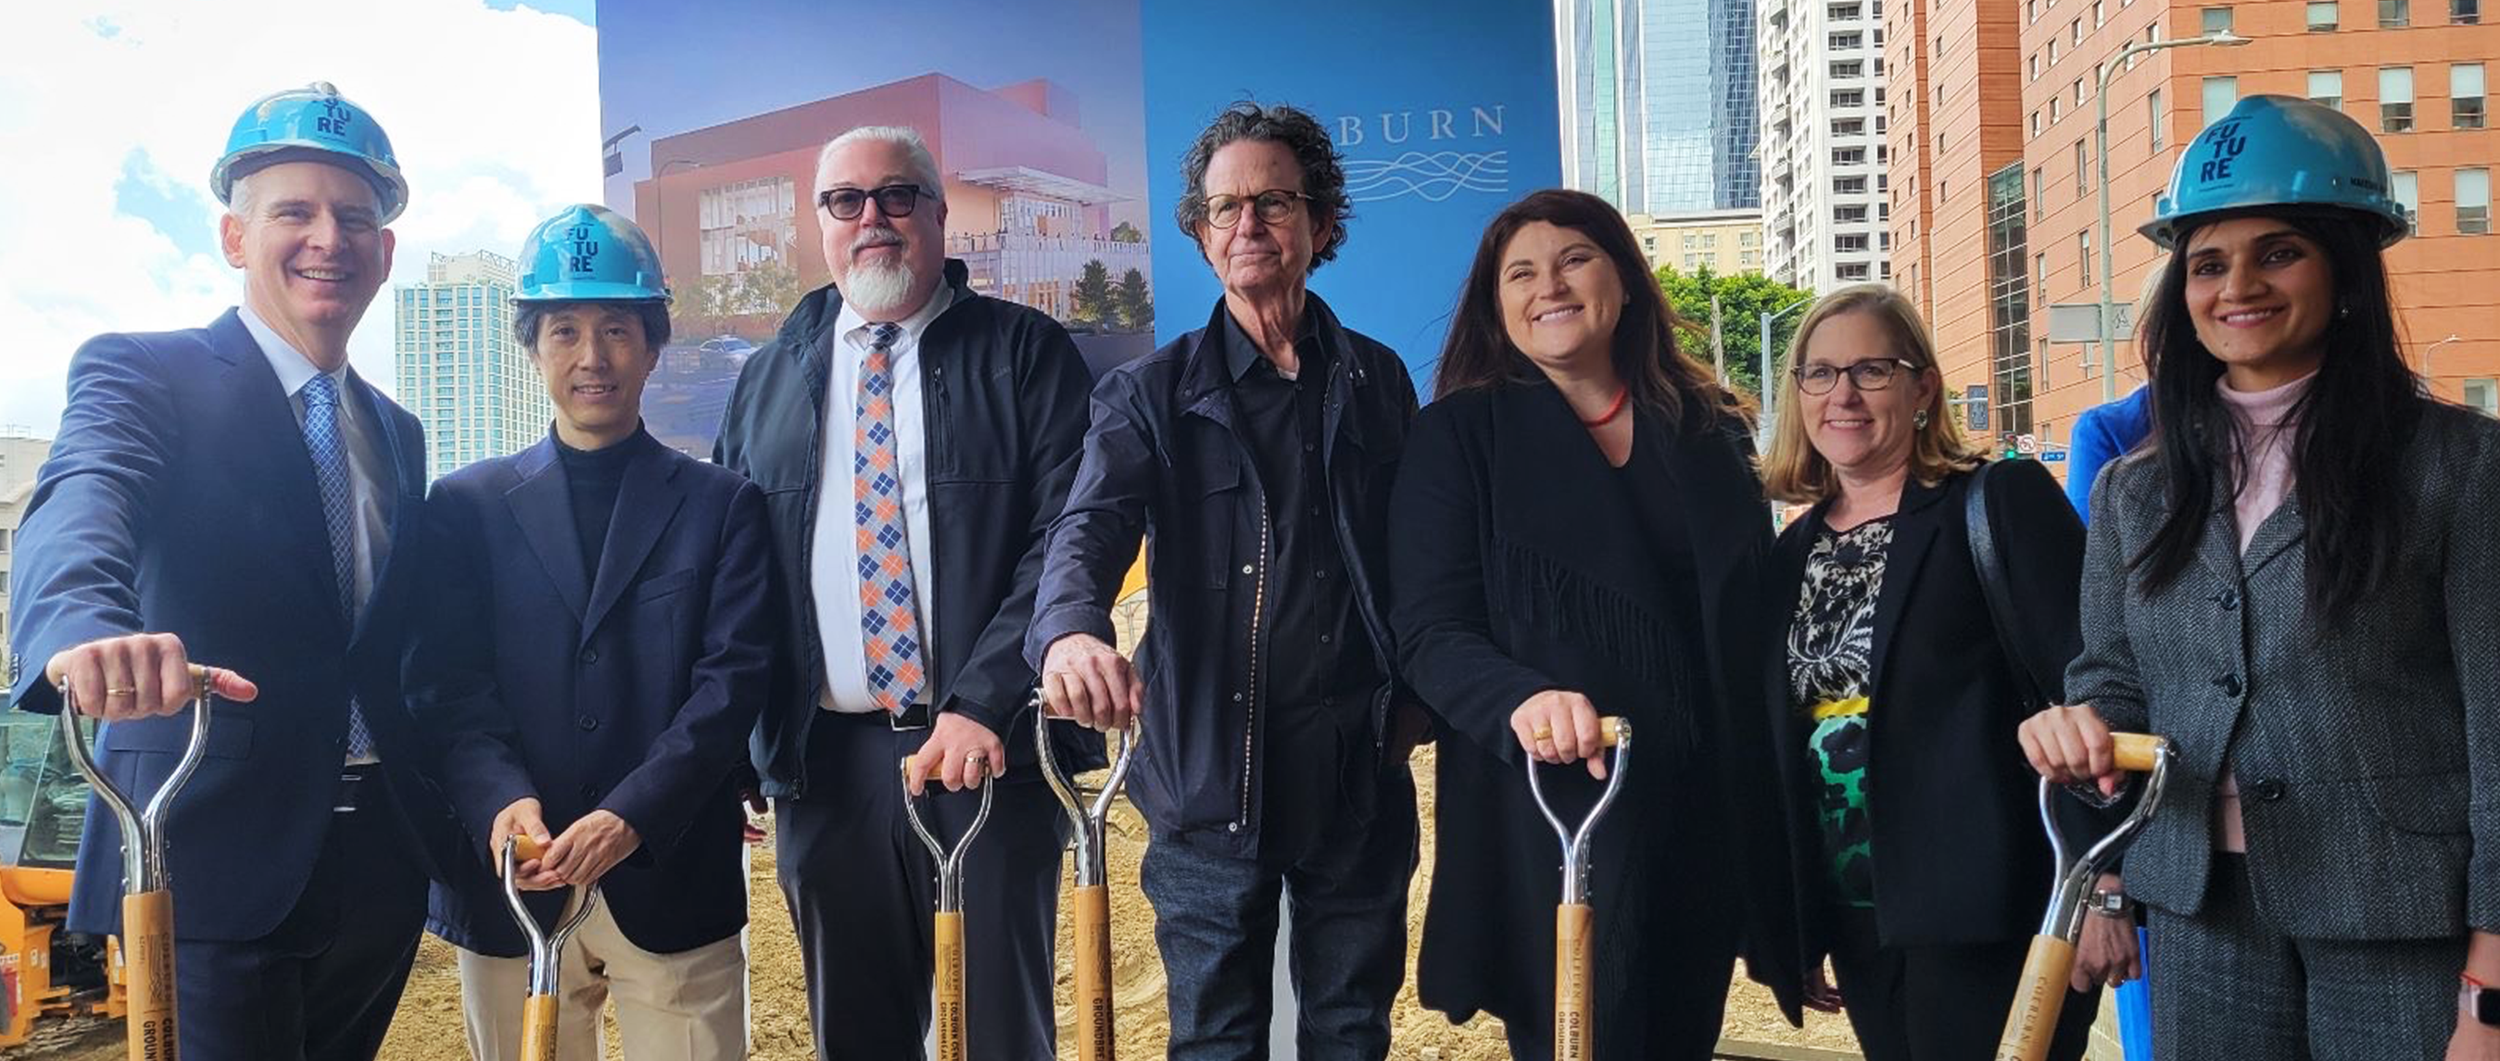 Groundbreaking Day at the Colburn School!